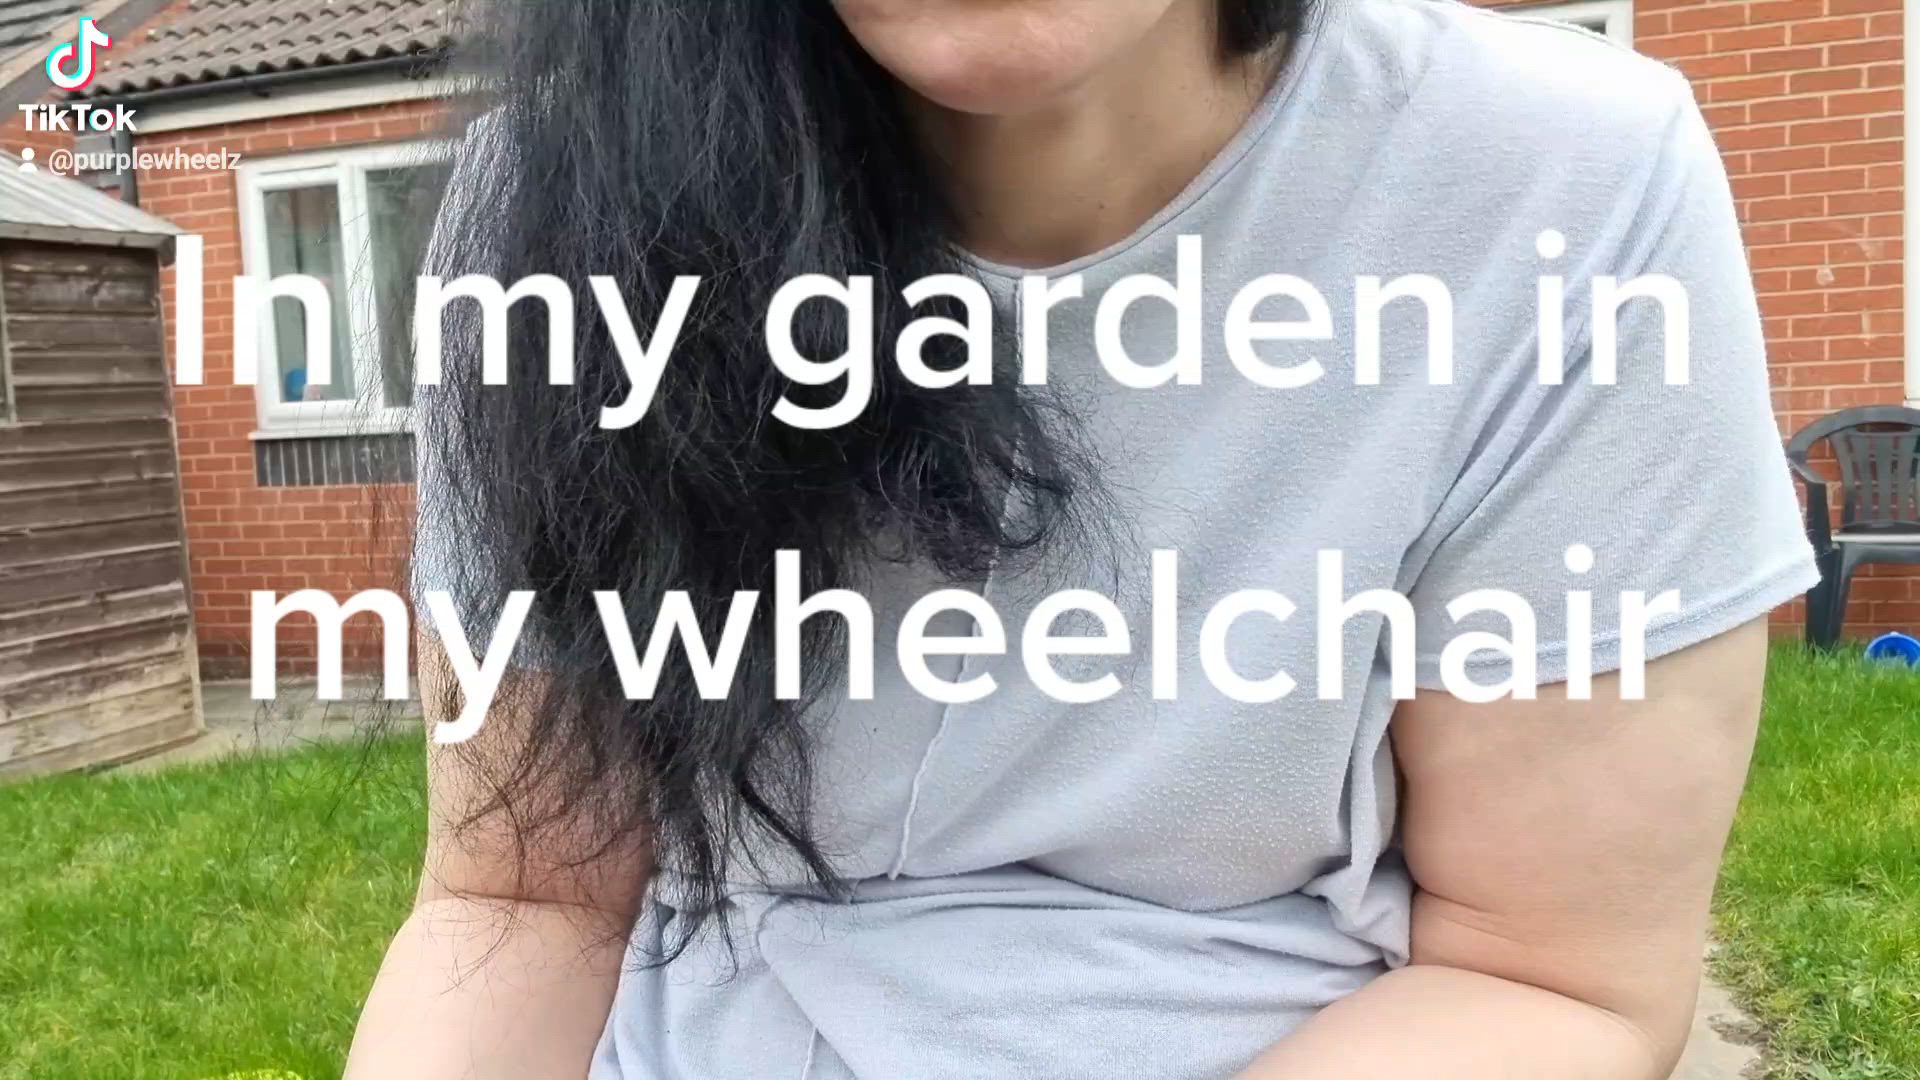 Amateur porn video with onlyfans model purplewheelz <strong>@paraplegiclady</strong>